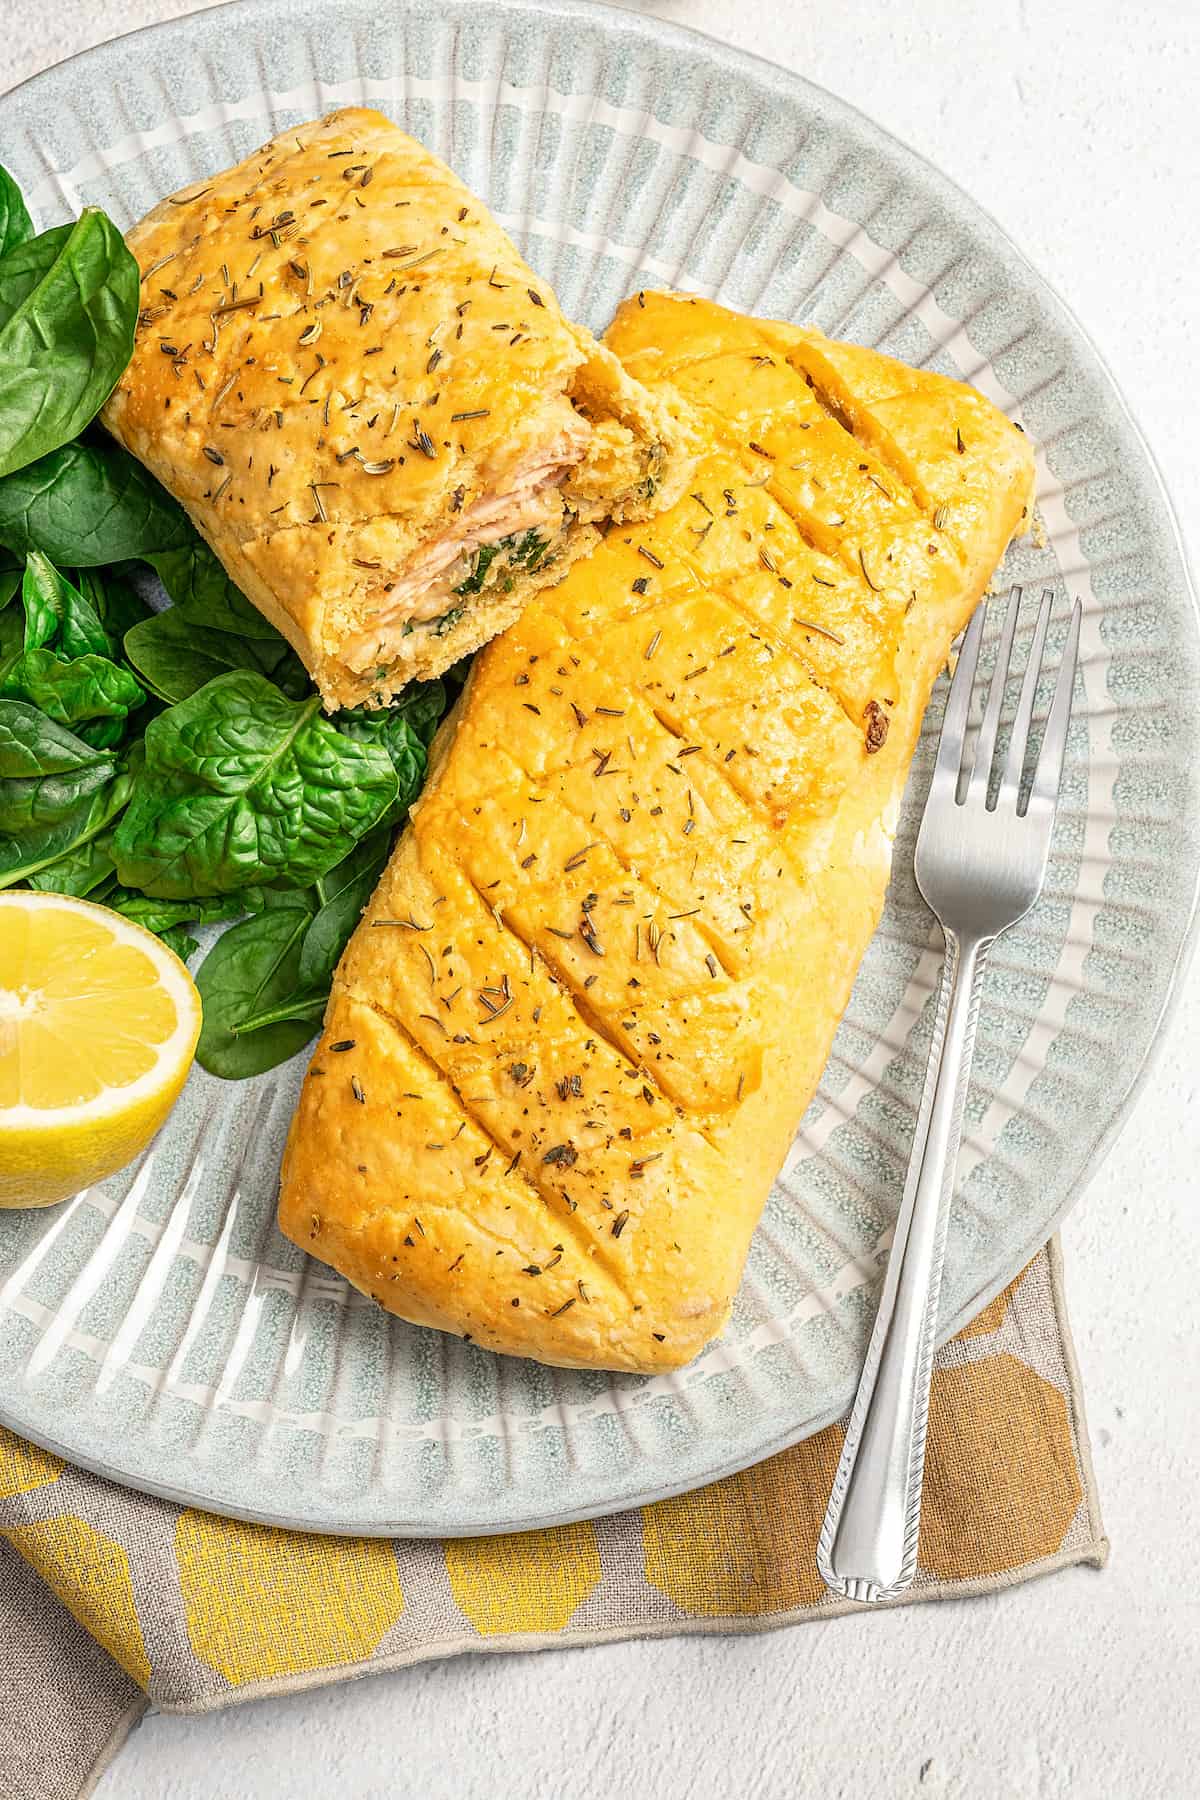 A whole gluten-free Salmon Wellington plus a half Wellington on a platter, next to a lemon wedge and fresh spinach leaves and a fork.